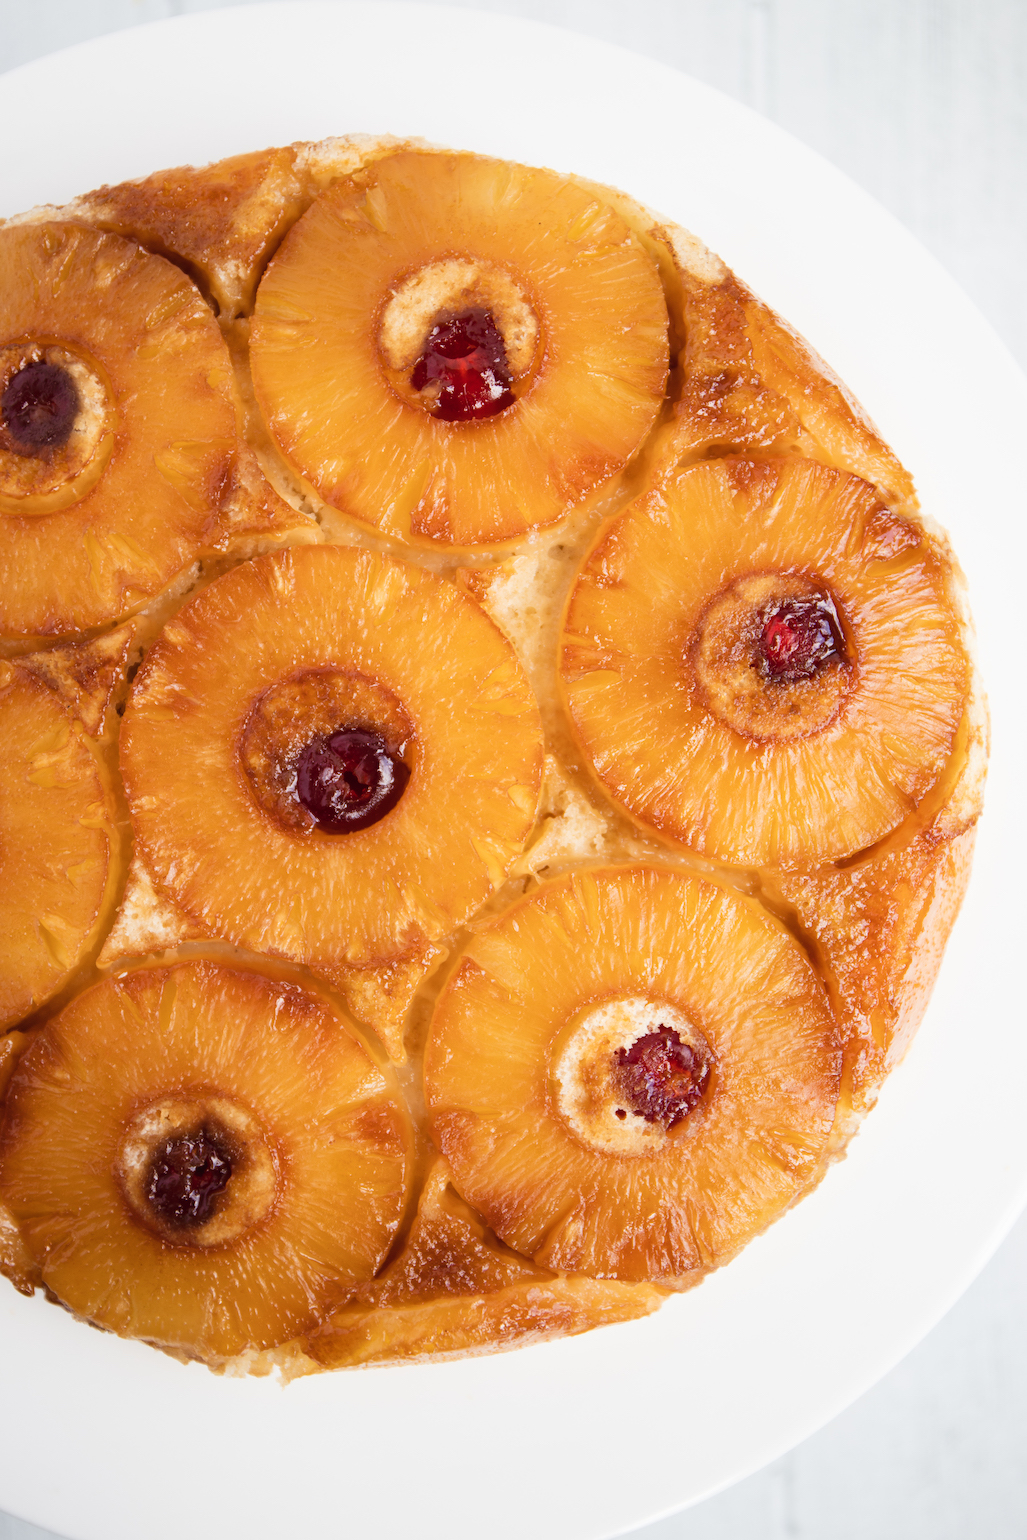 Vegan Upside-Down Pineapple Cake, with Chocolate Drizzle